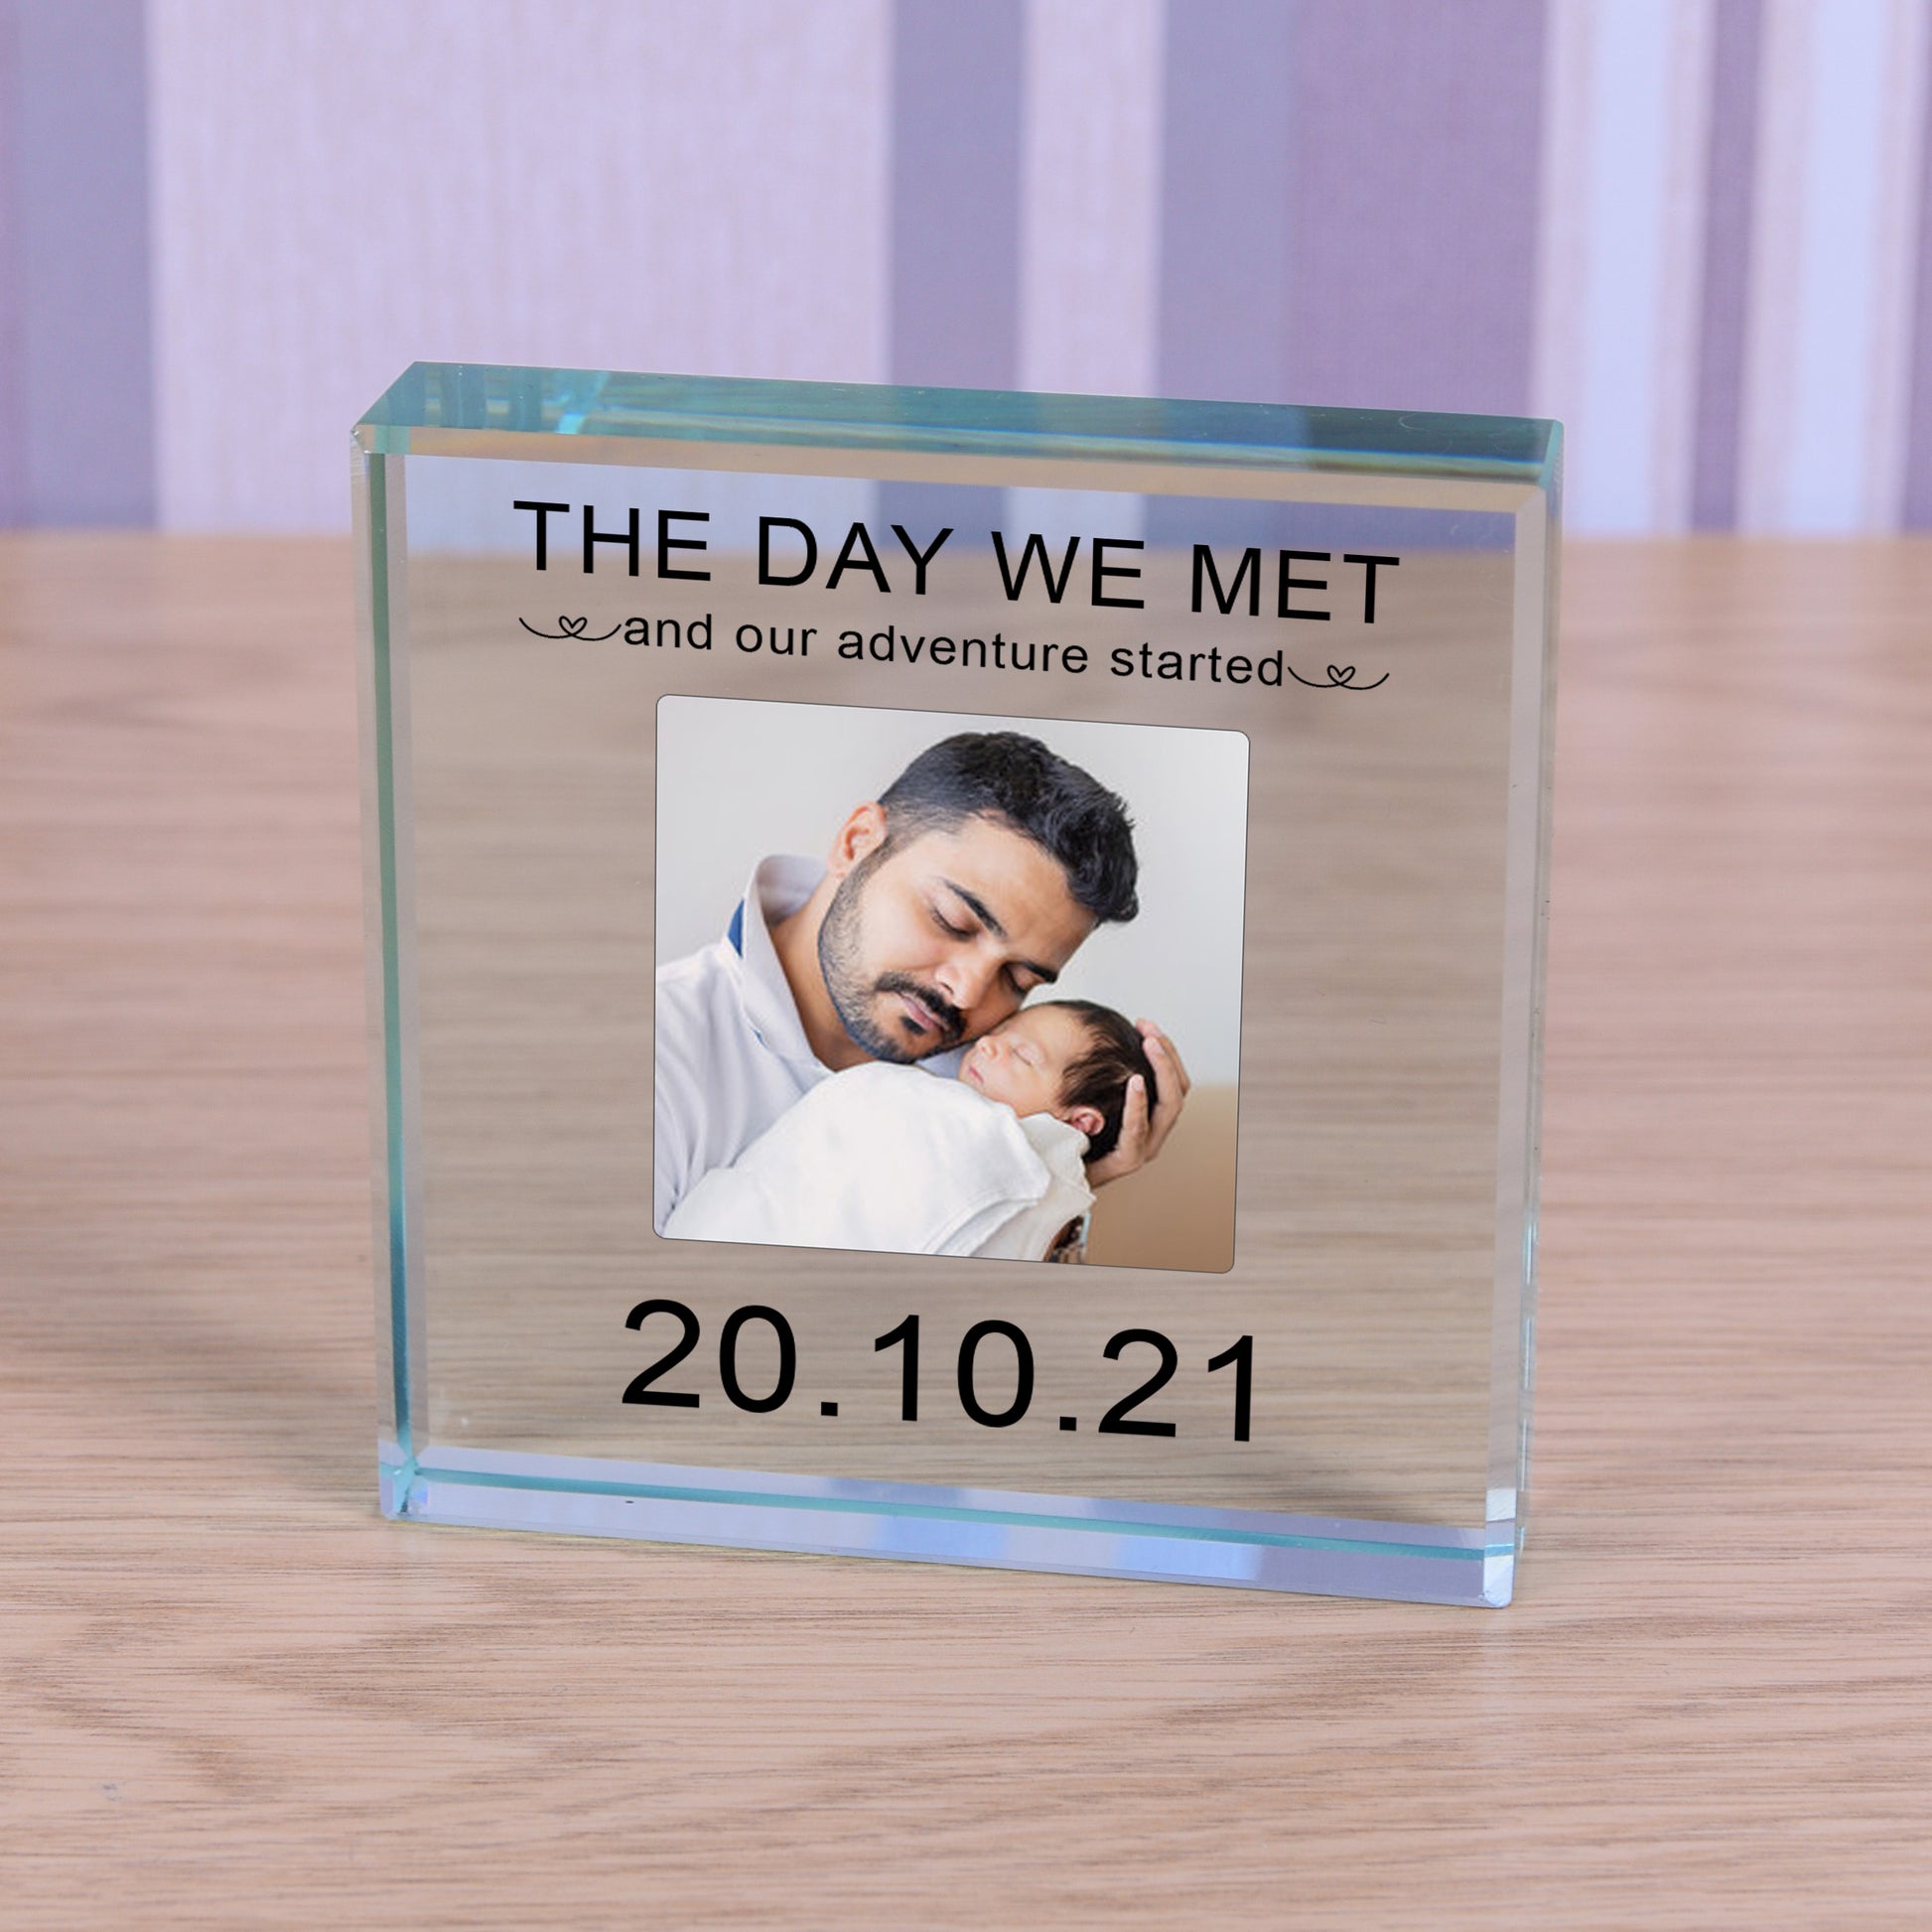 Personalised Photo Glass Token - The Day We Met Gift